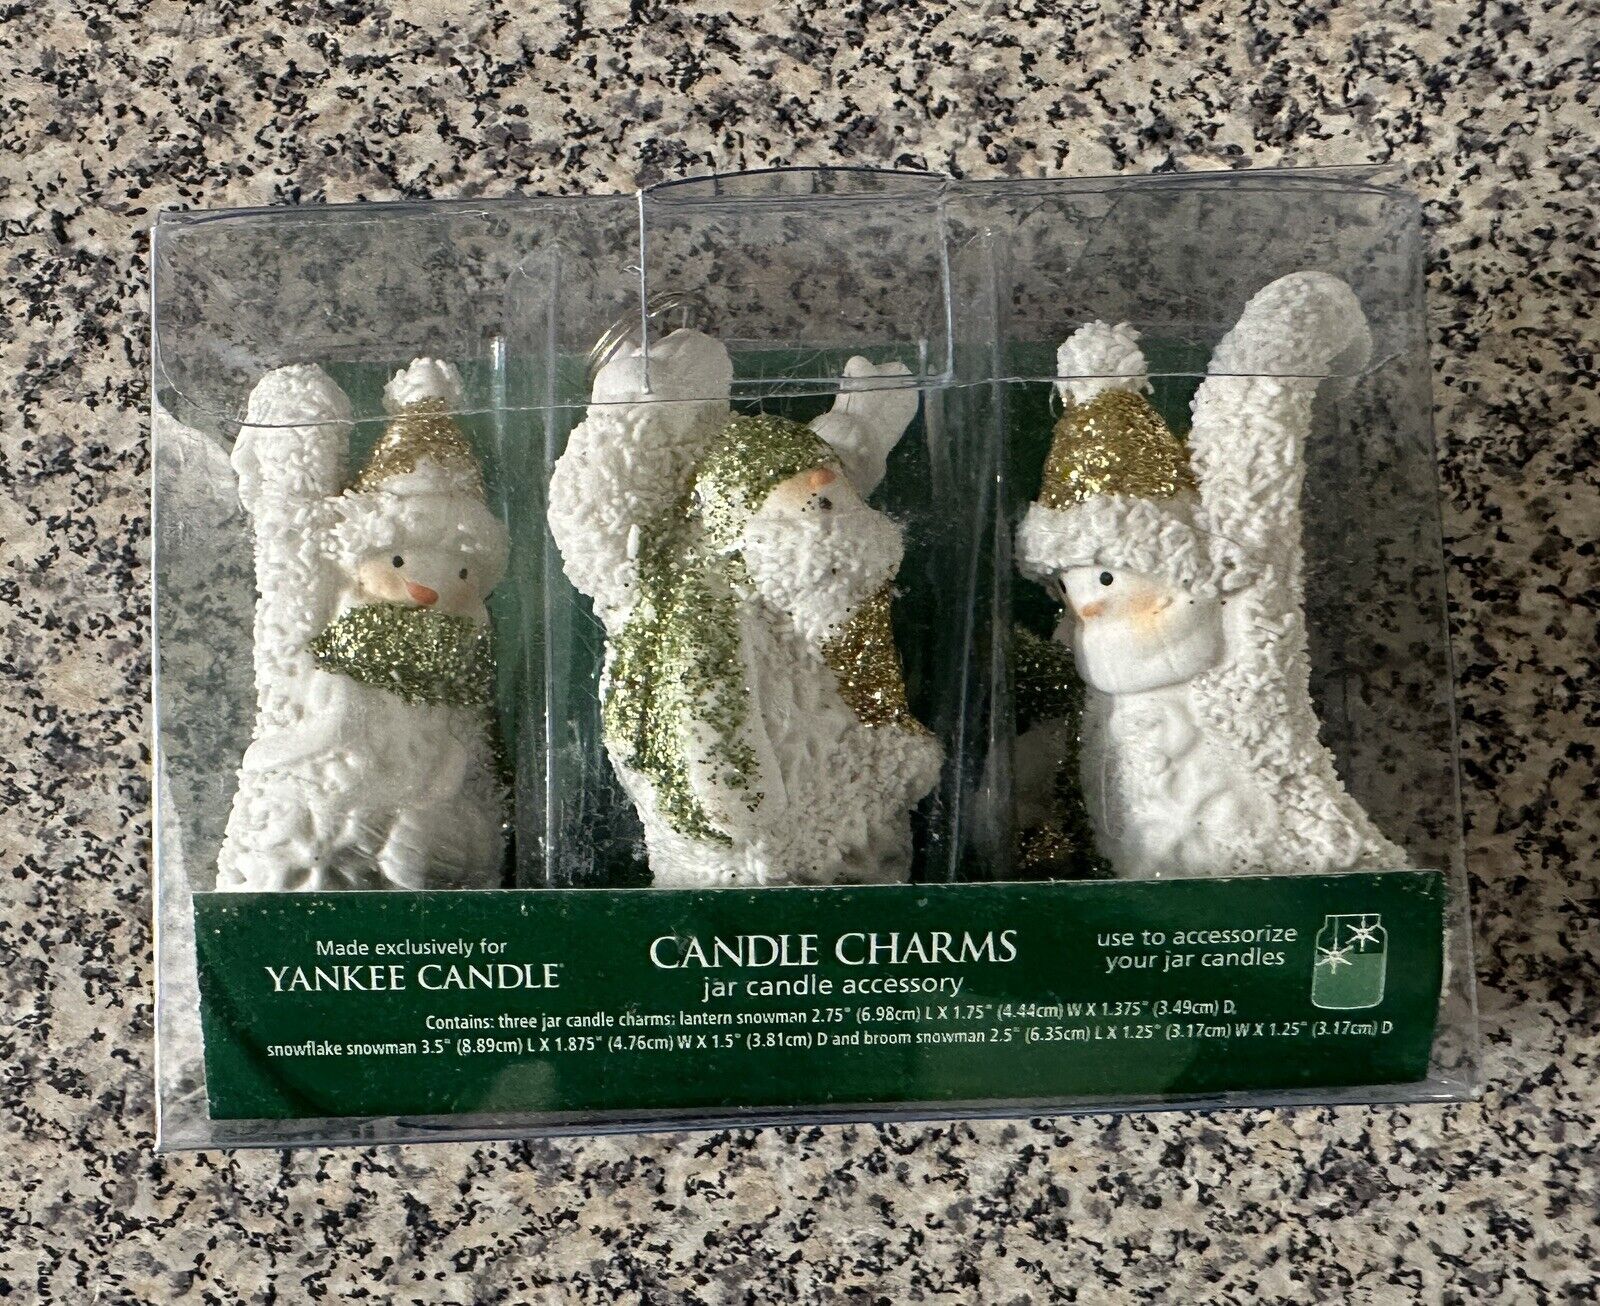 Yankee Candle Snowmen Candle Charms To Be Used To Decorate 2 Wick Candle Jars